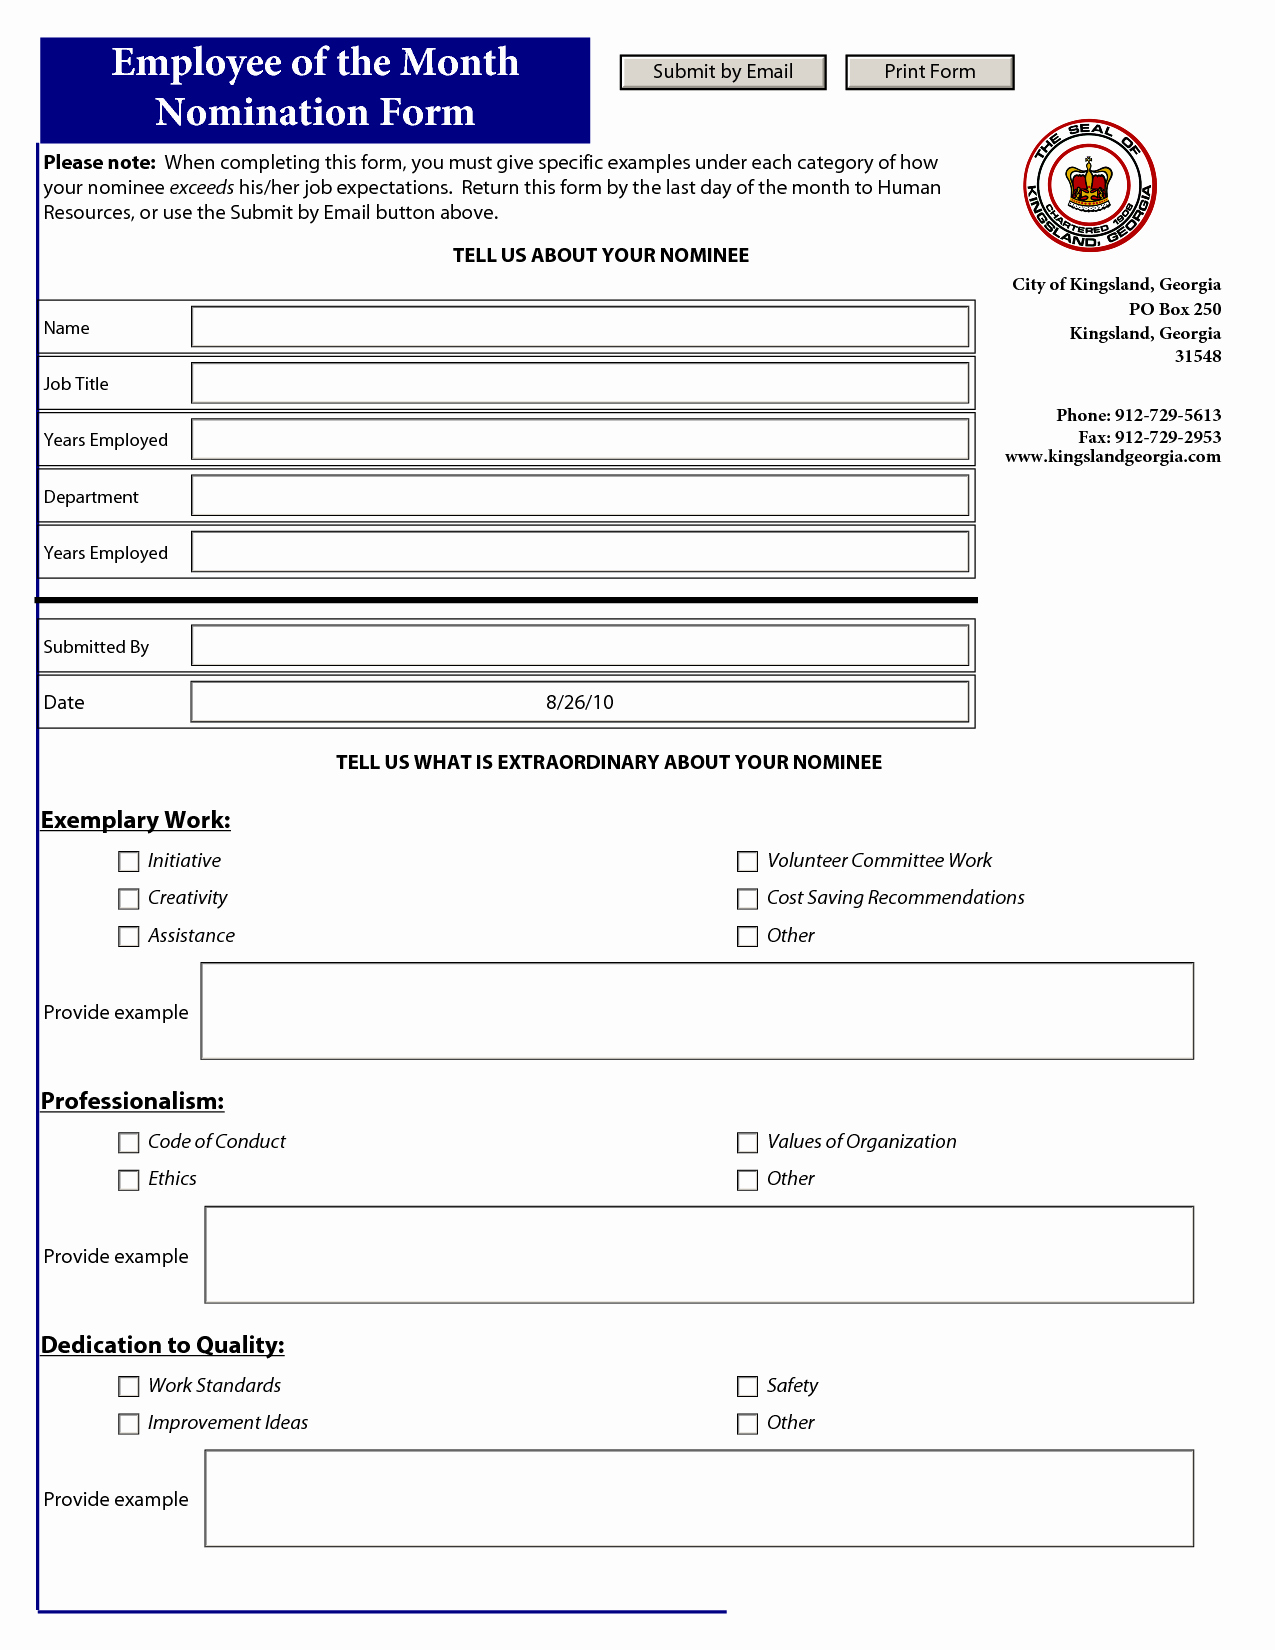 Employee Recognition Nomination form Template Beautiful Employee Of the Month Nomination Template Pdf